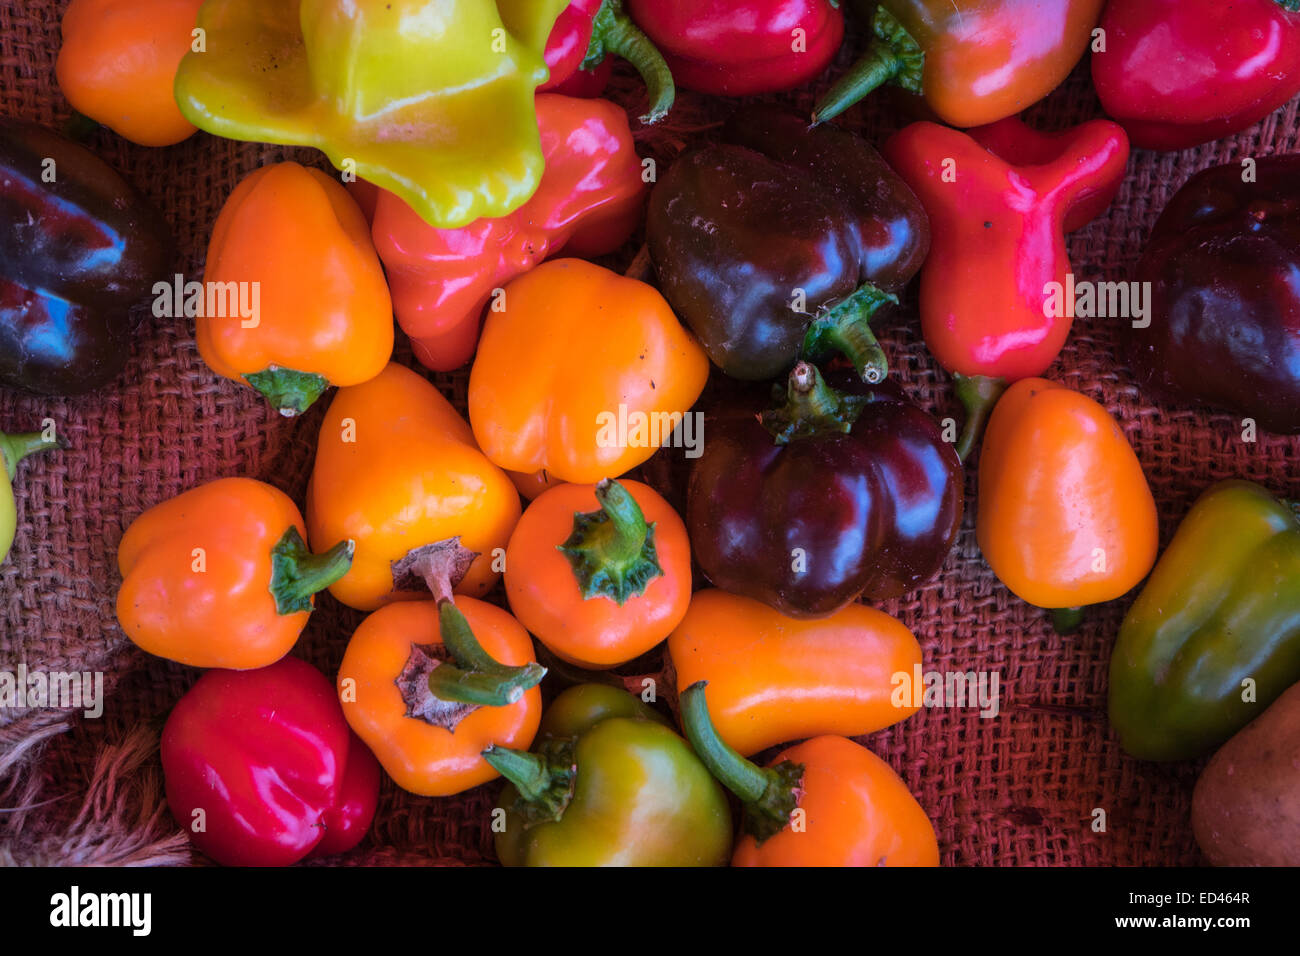 Peppers of various colors, colours, red, orange, green on sacking. Stock Photo